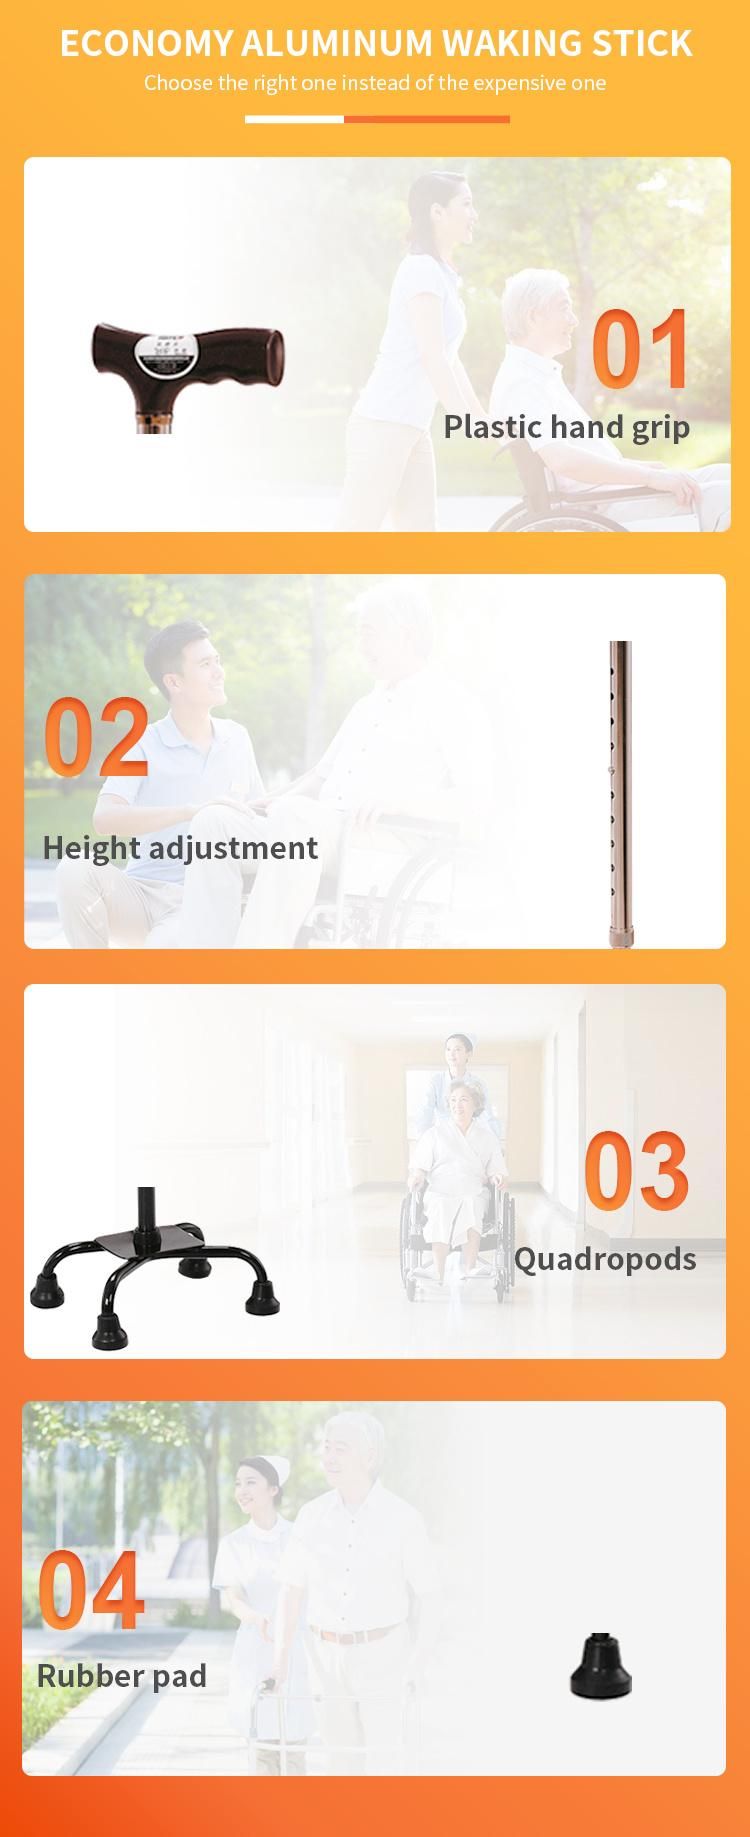 Small Based Height Adjustable Quad Cane Aluminum Alloy Walking Stick Antiskid Quadropods Bronze for Elderly People with Limited Mobility